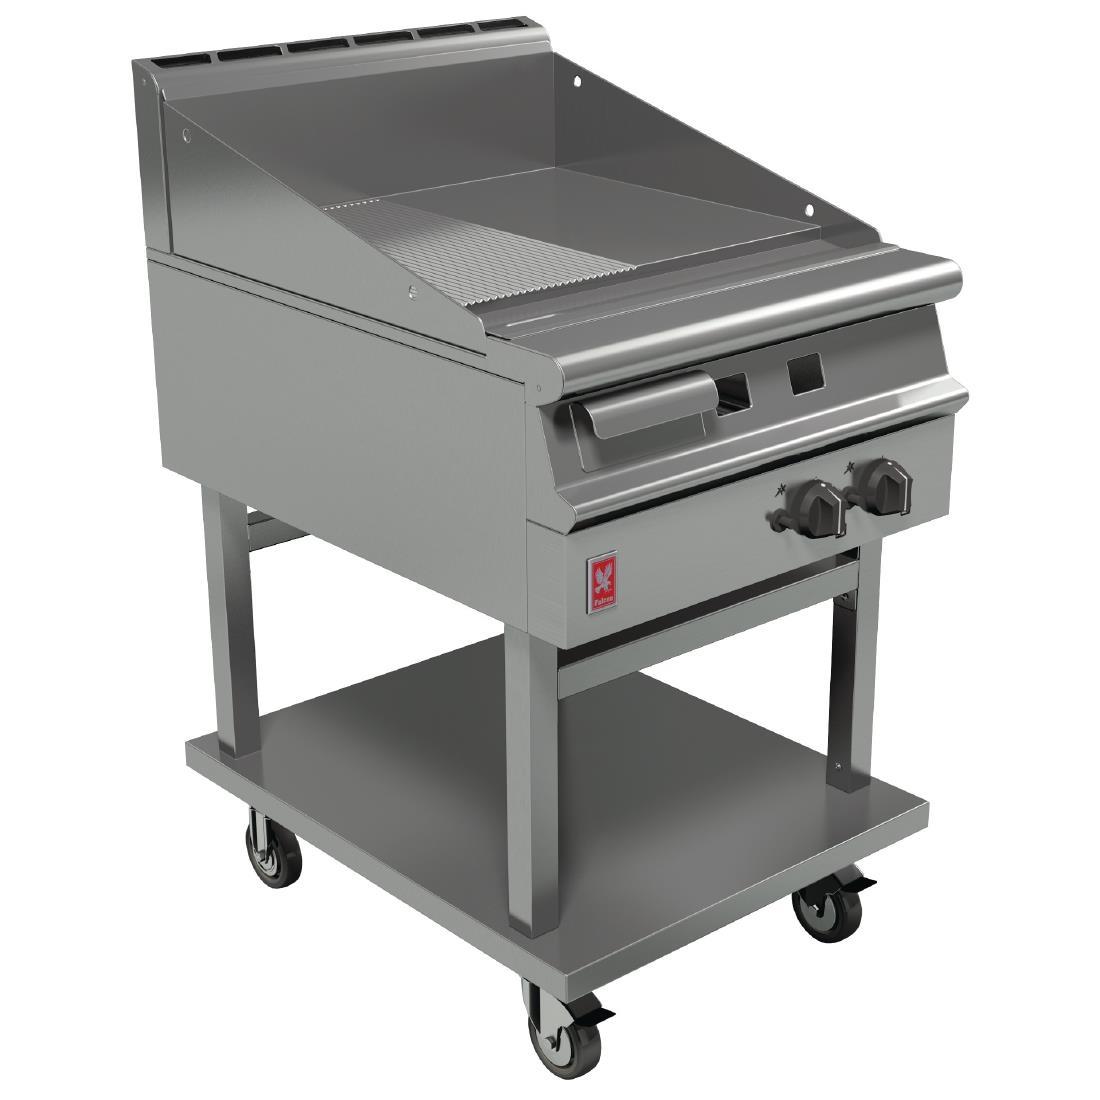 Falcon Dominator Plus 600mm Wide Half Ribbed Natural Gas Griddle on Mobile Stand G3641R - GP046-N  - 1